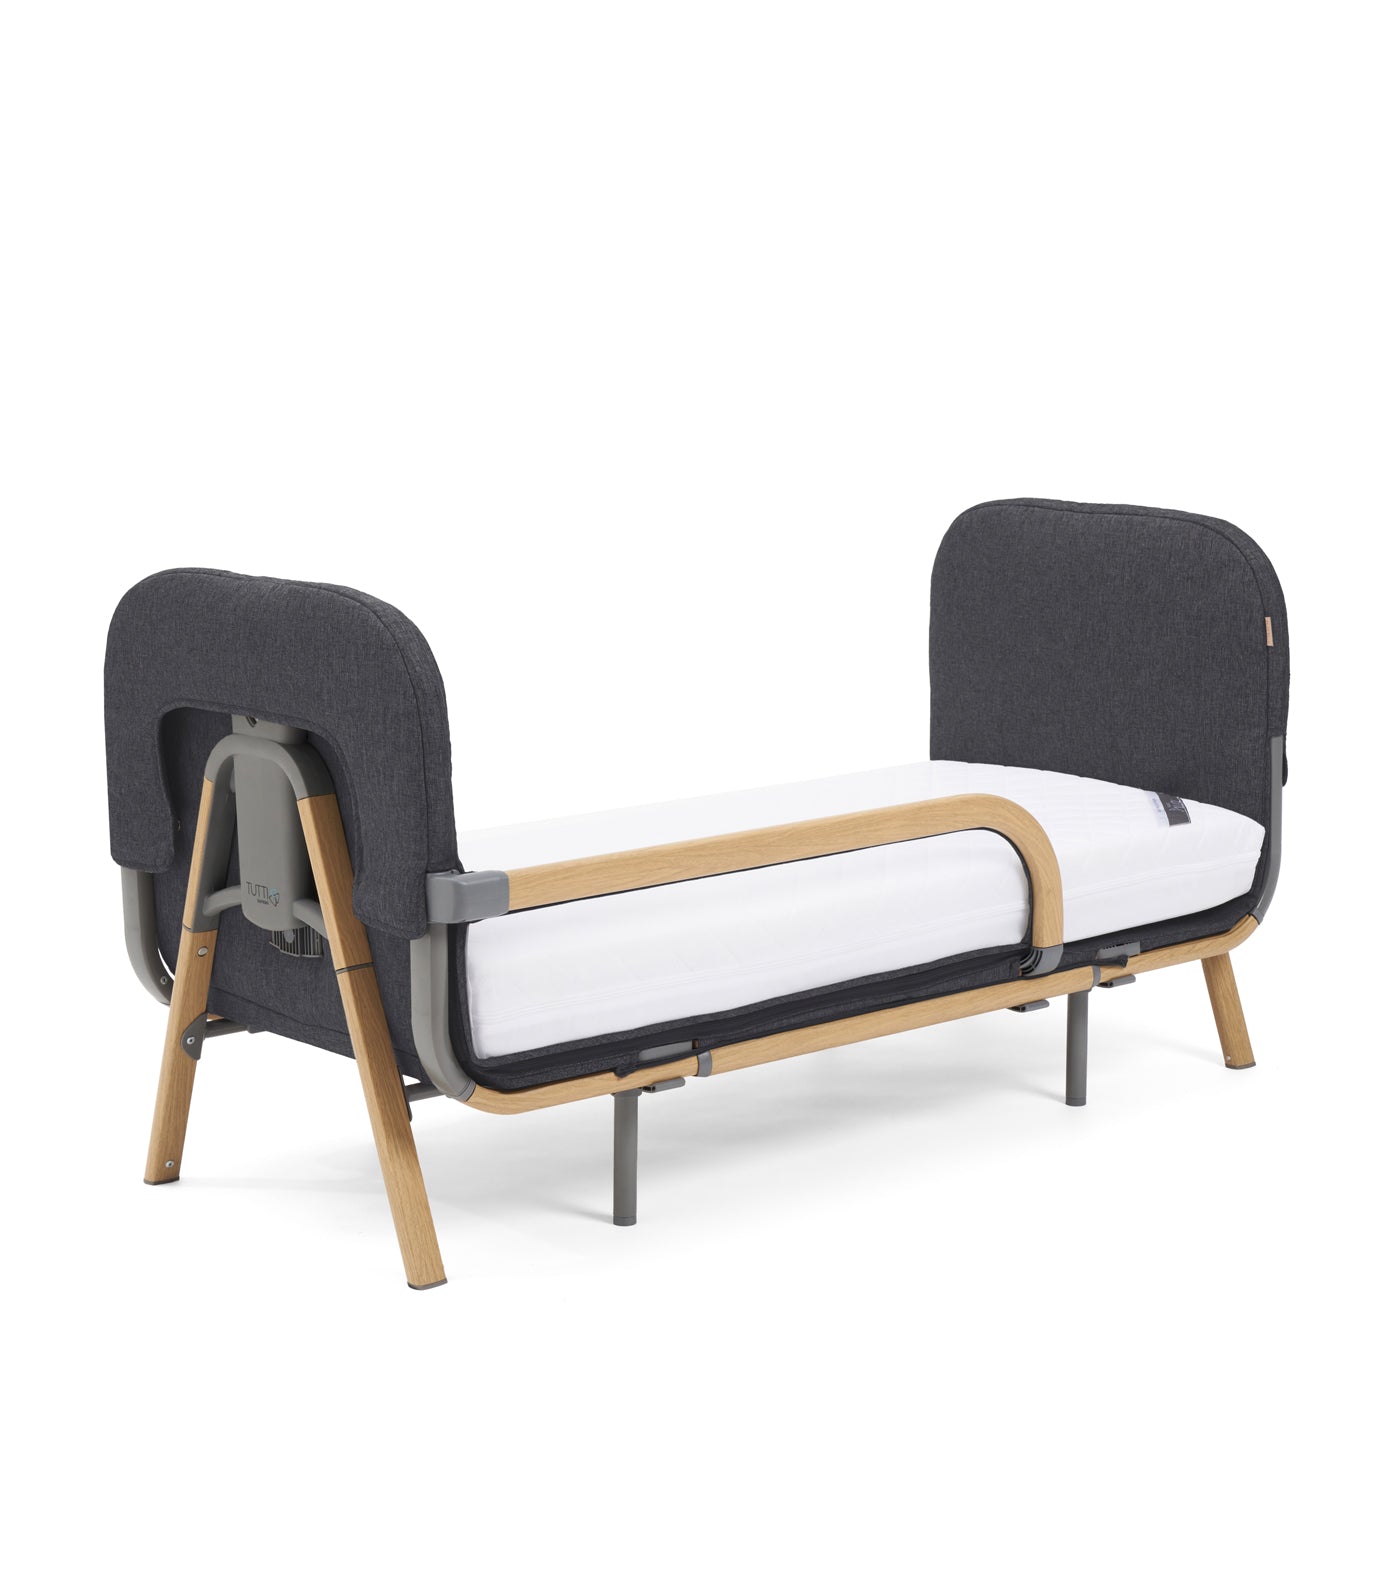 Tutti Bambini Cozee XL Junior Bed and Sofa Expansion Pack - Oak/Liquorice